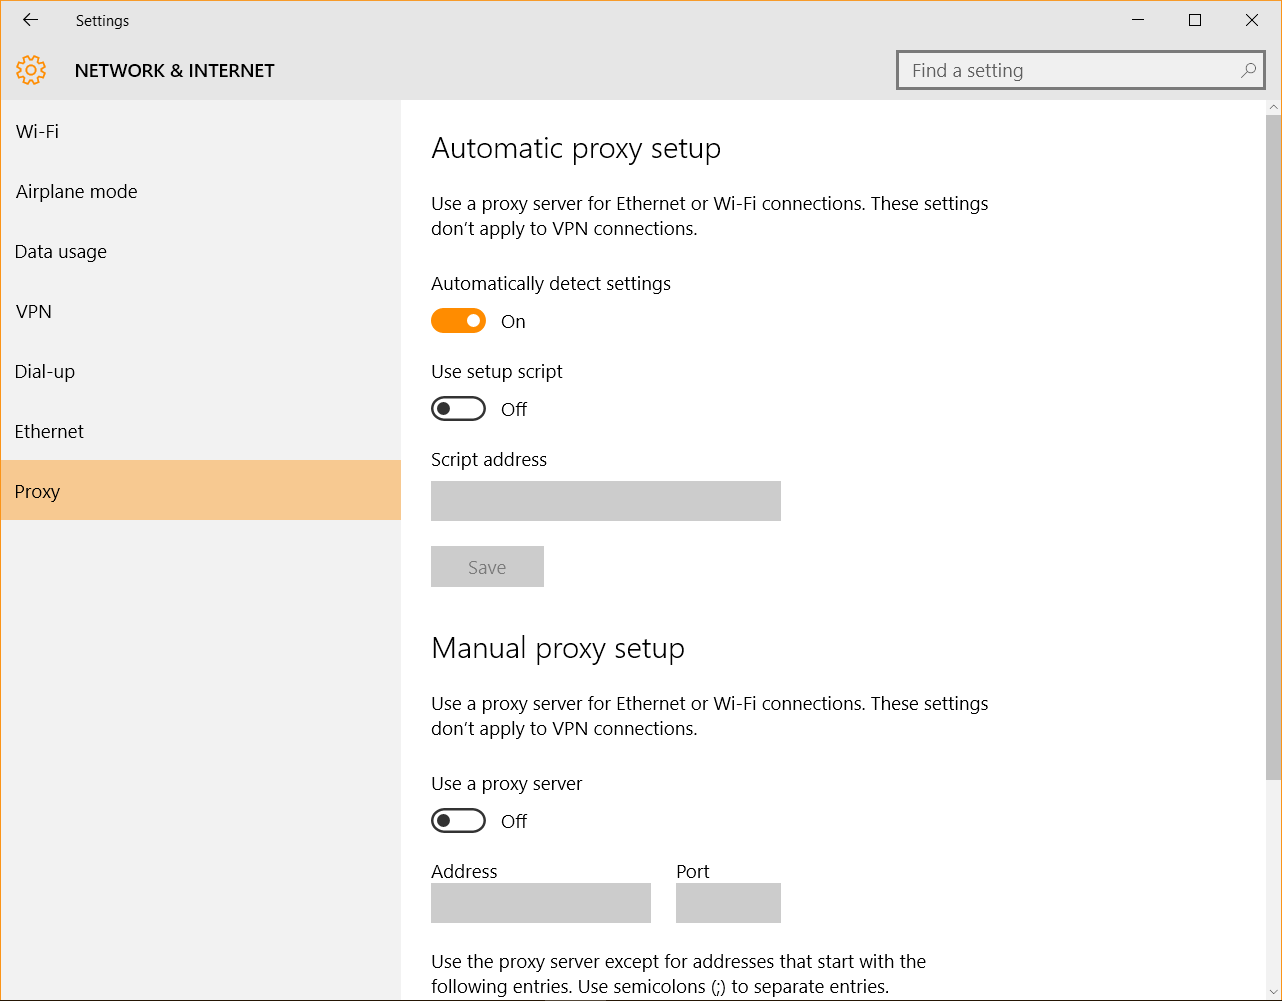 Windows 10 Security Guide - Proxy Settings